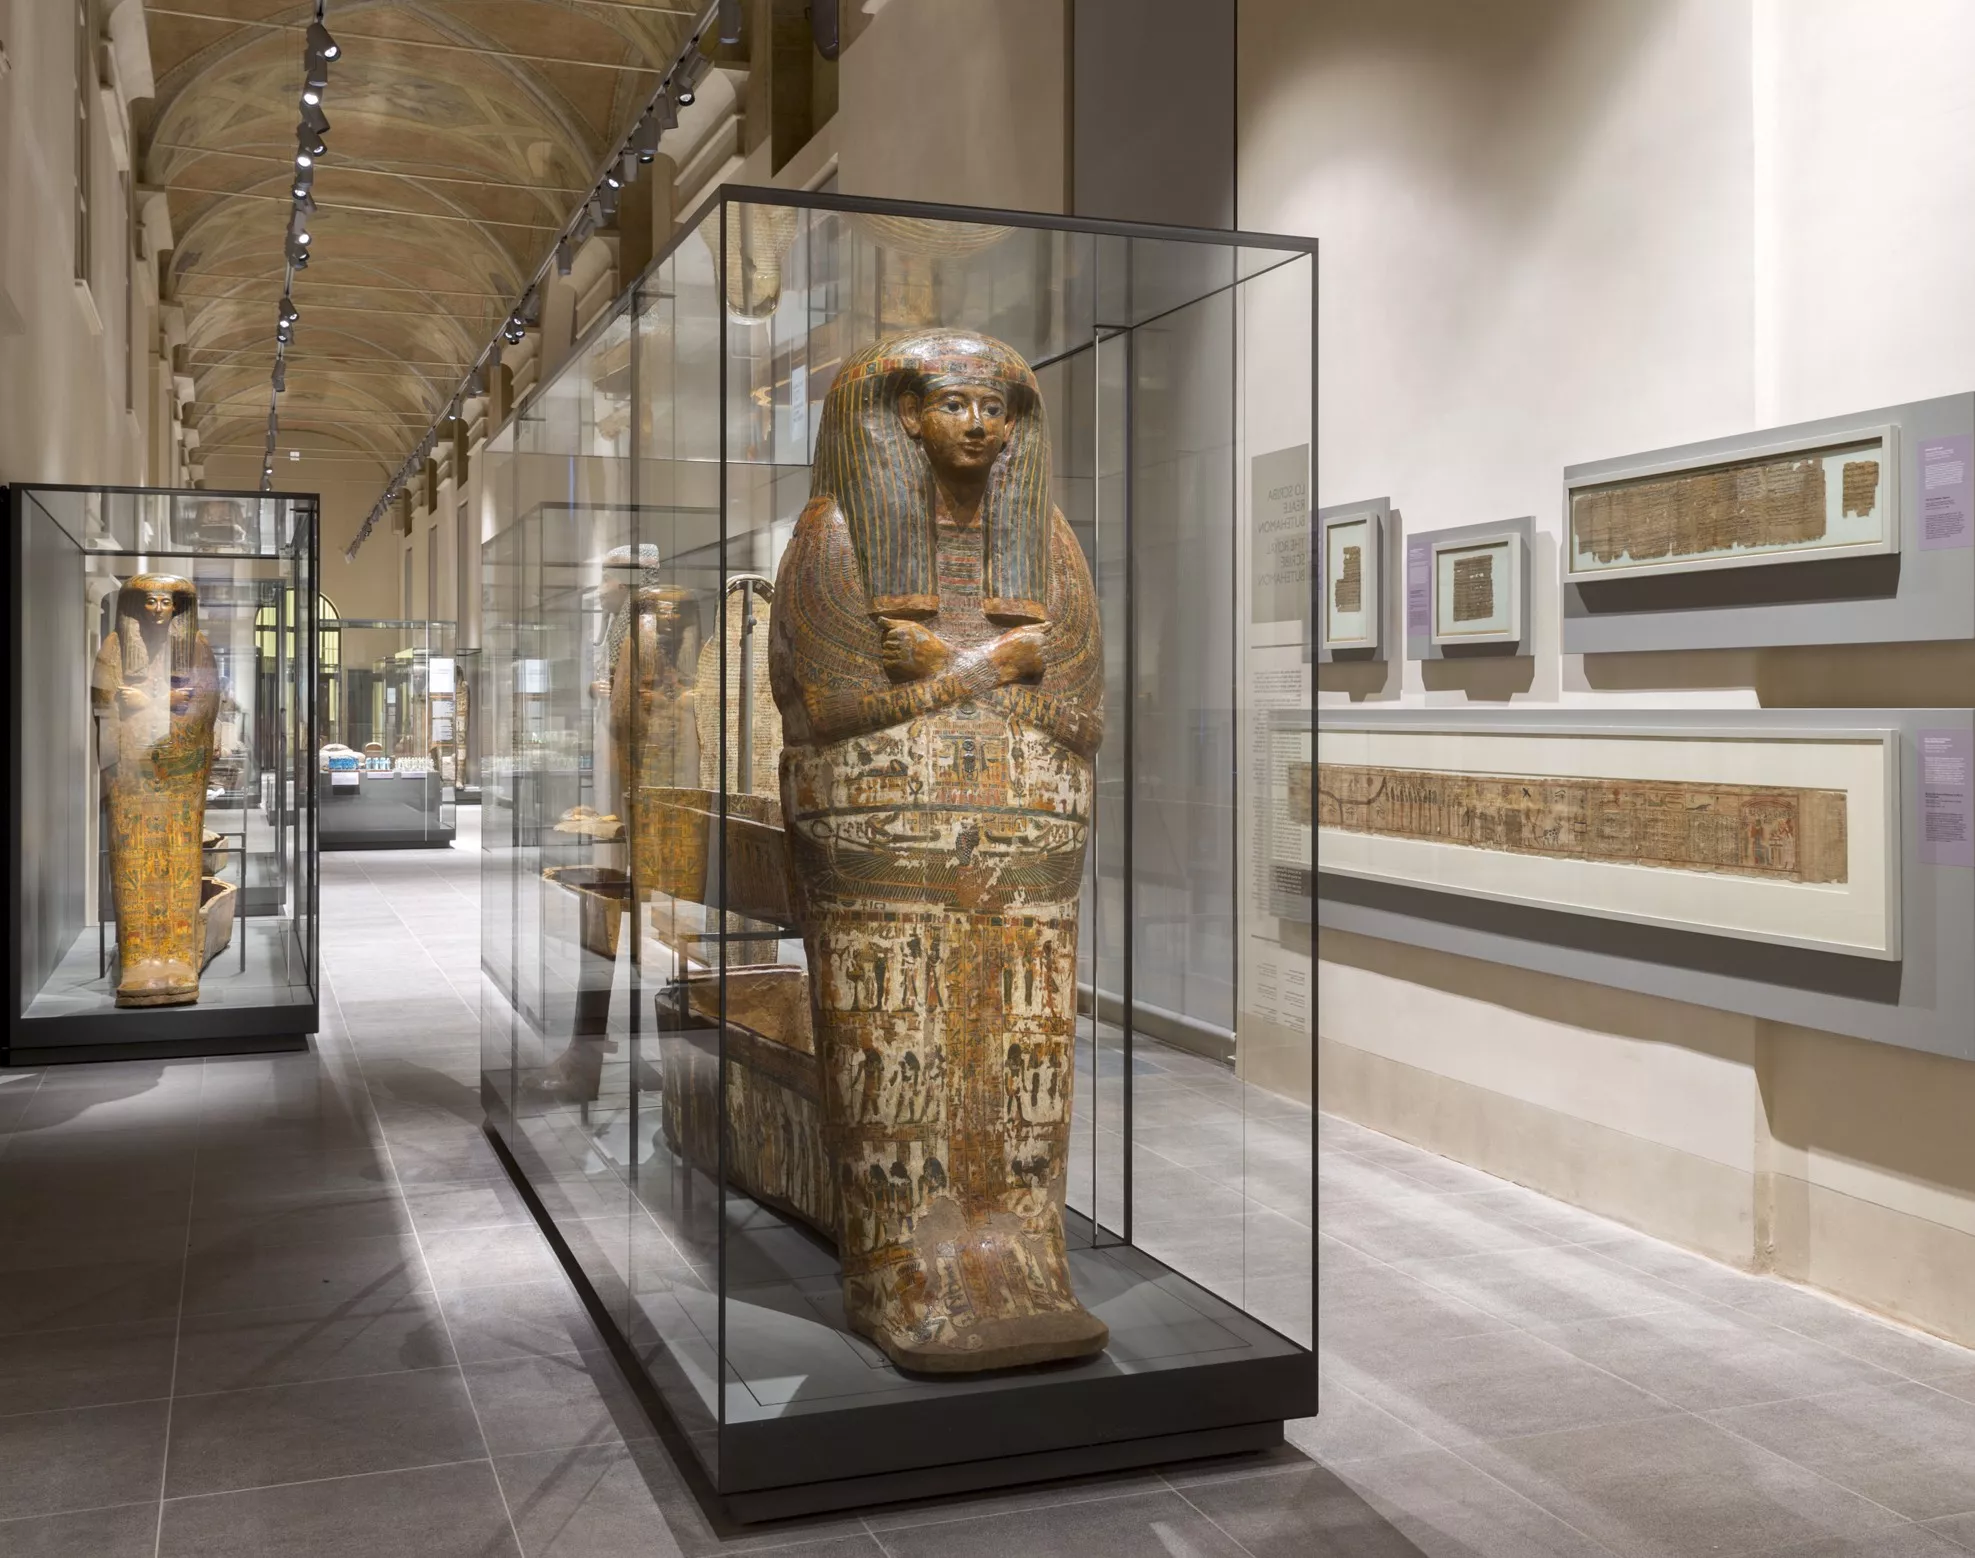 Egyptian Museum in Italy, Europe | Museums - Rated 4.6